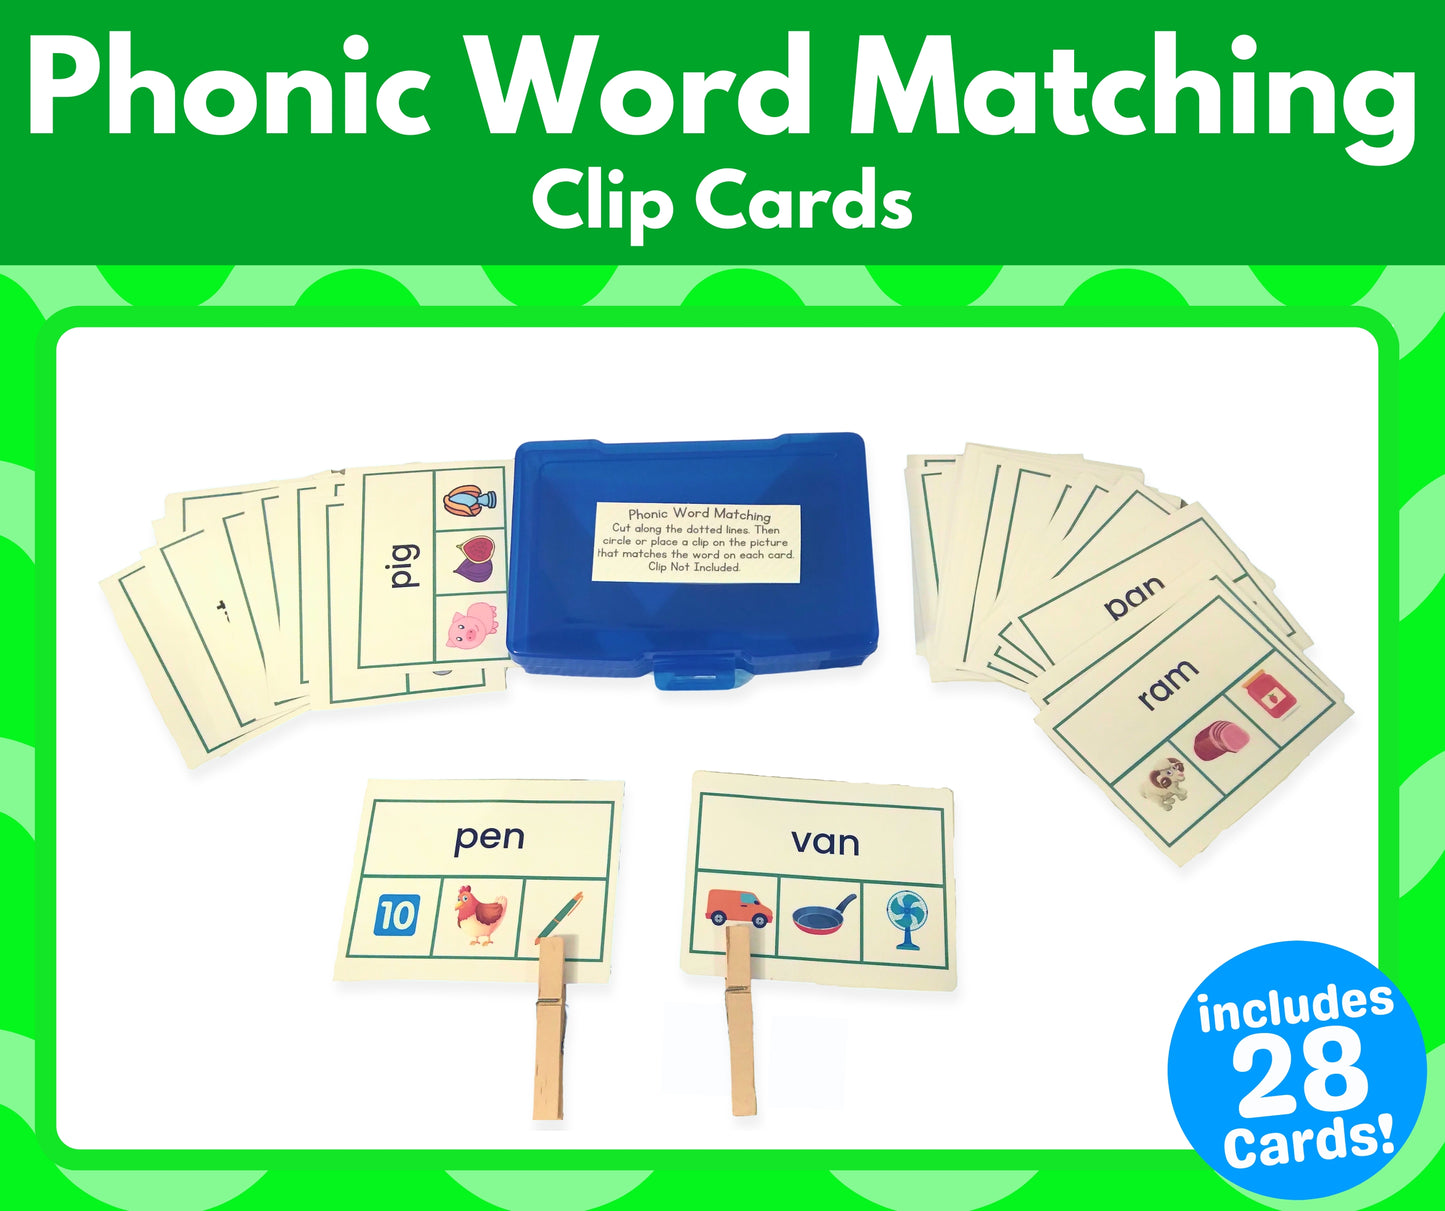 Phonic Word Matching Clip Cards (Task Box Activity) - Download